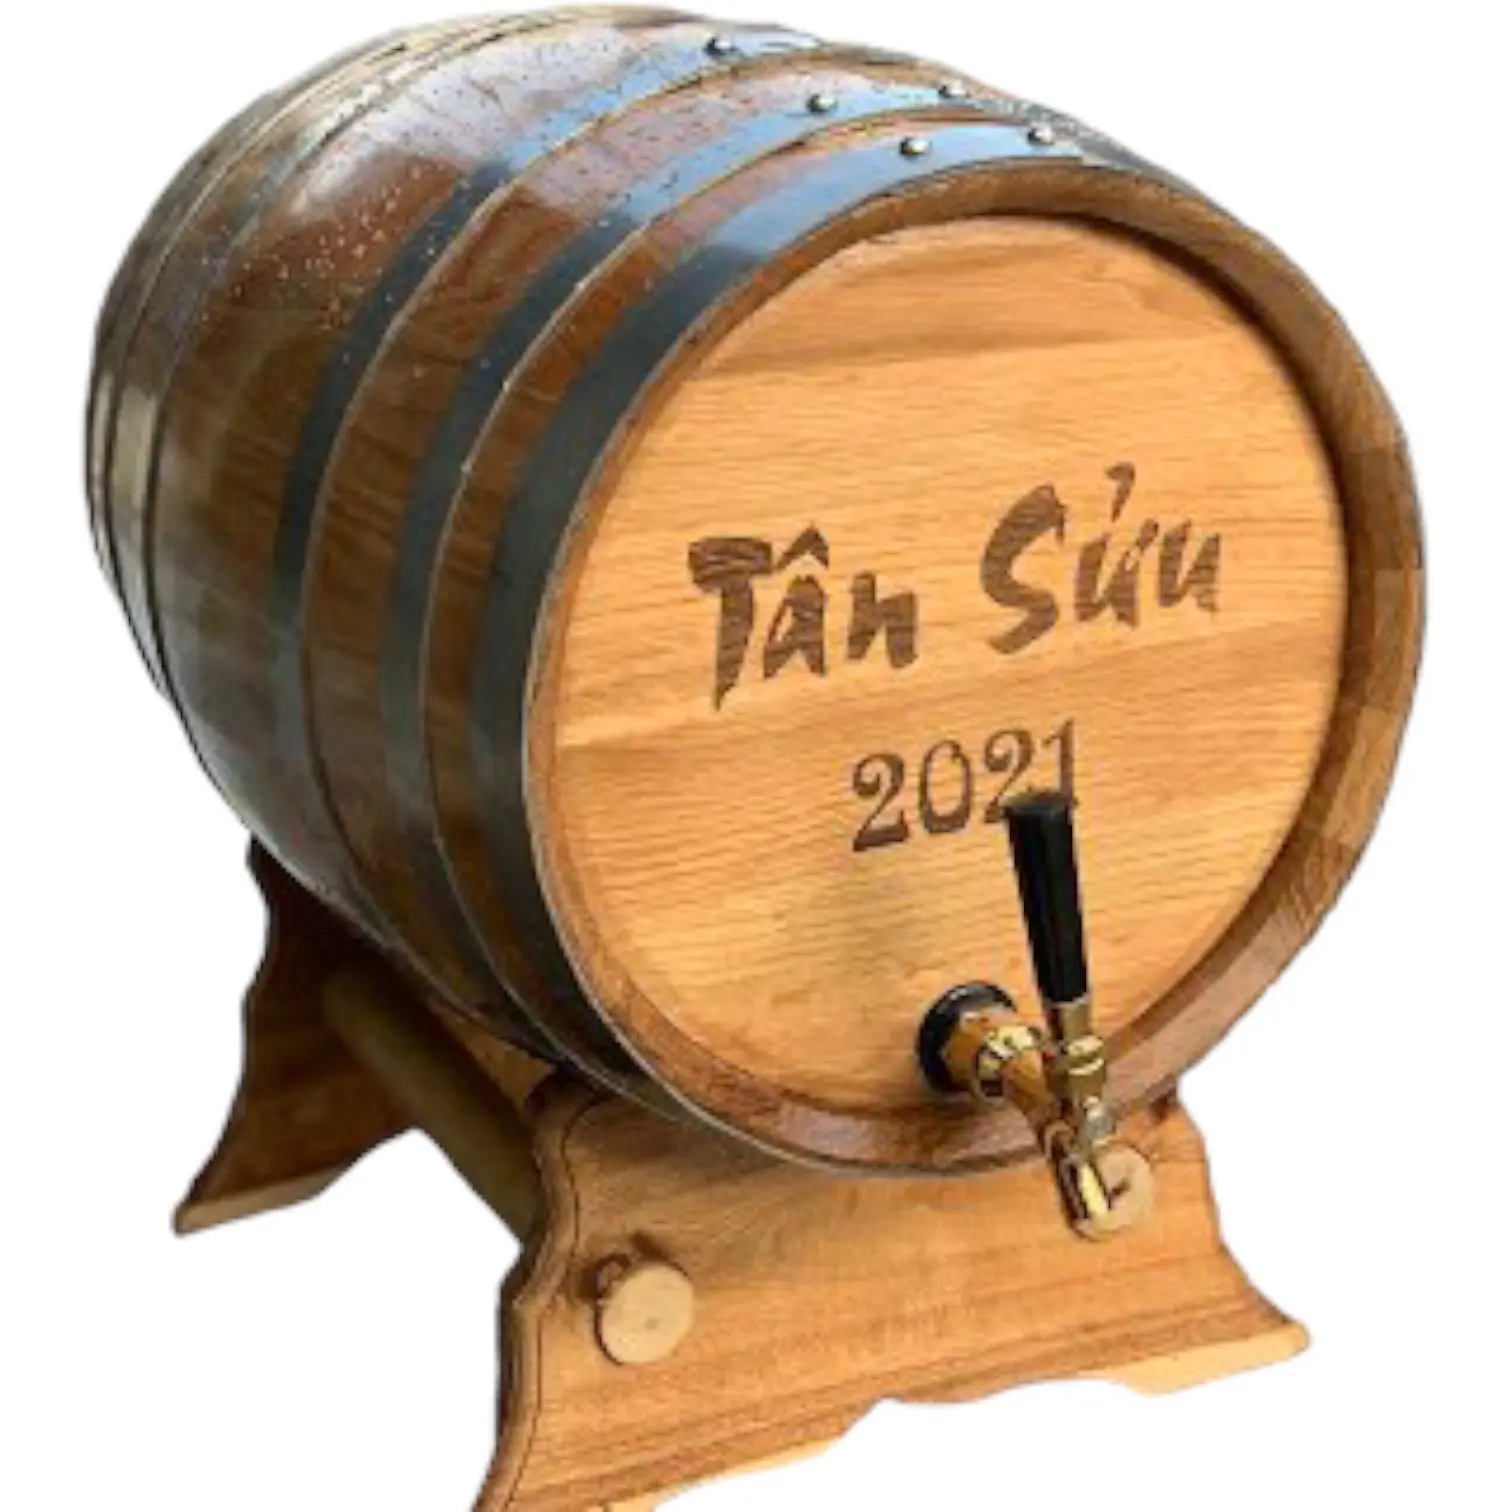 Factory Vietnam OEM/ODM Wholesale High Quality Cheap Natural Solid Oak Or Pine Wood Wine Barrel With Tap